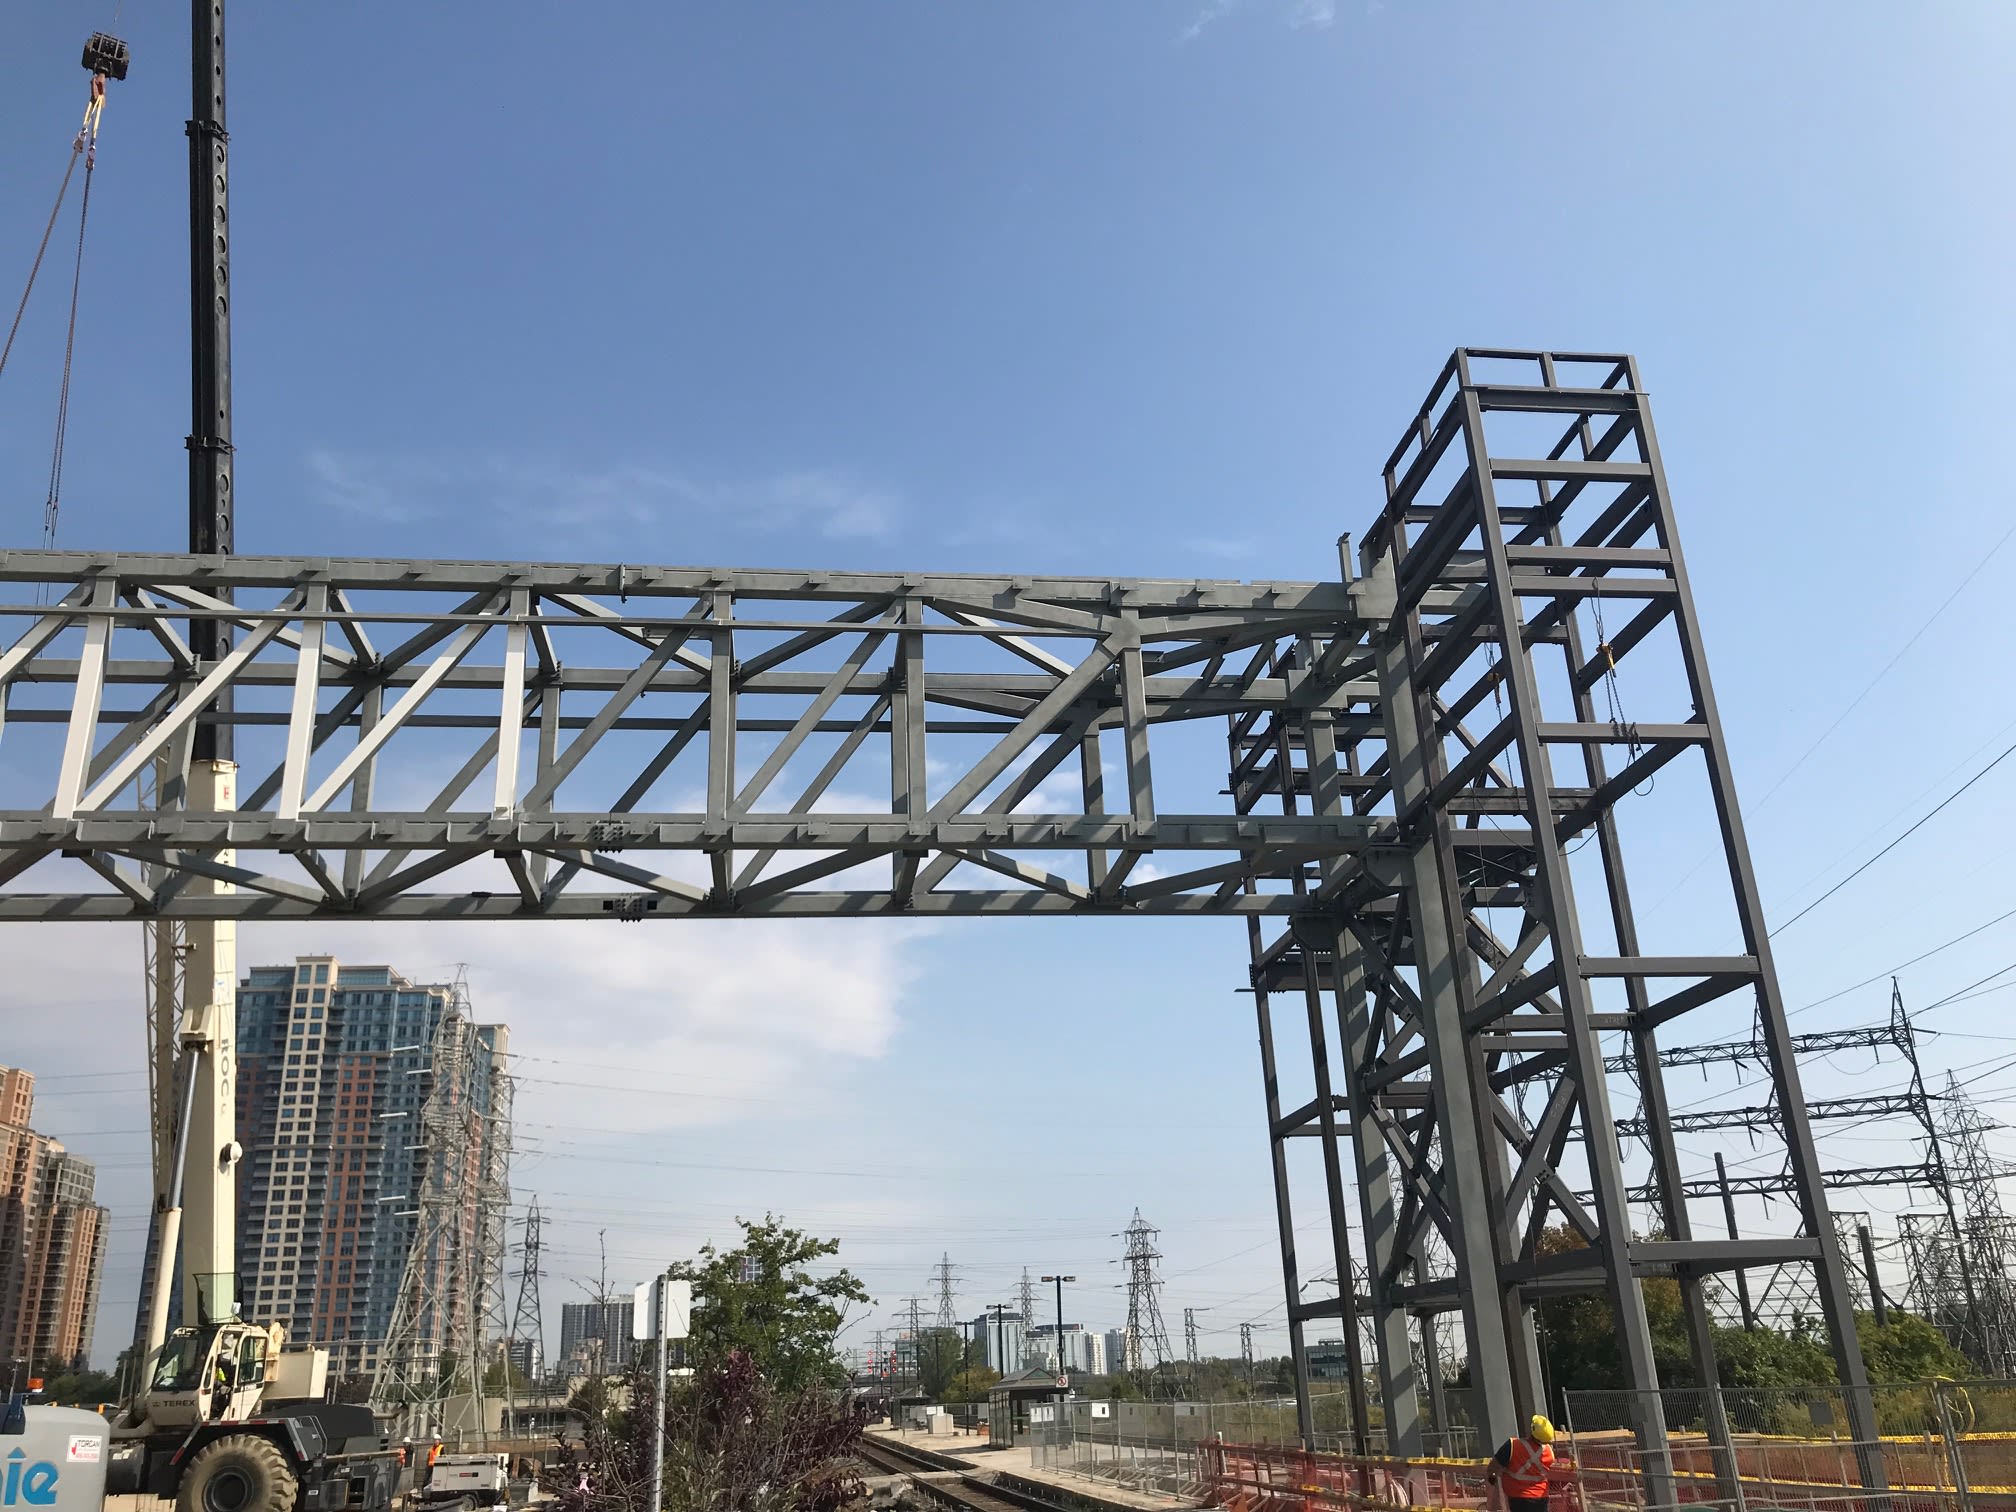 A closeup of the metal structure bridge over the tracks